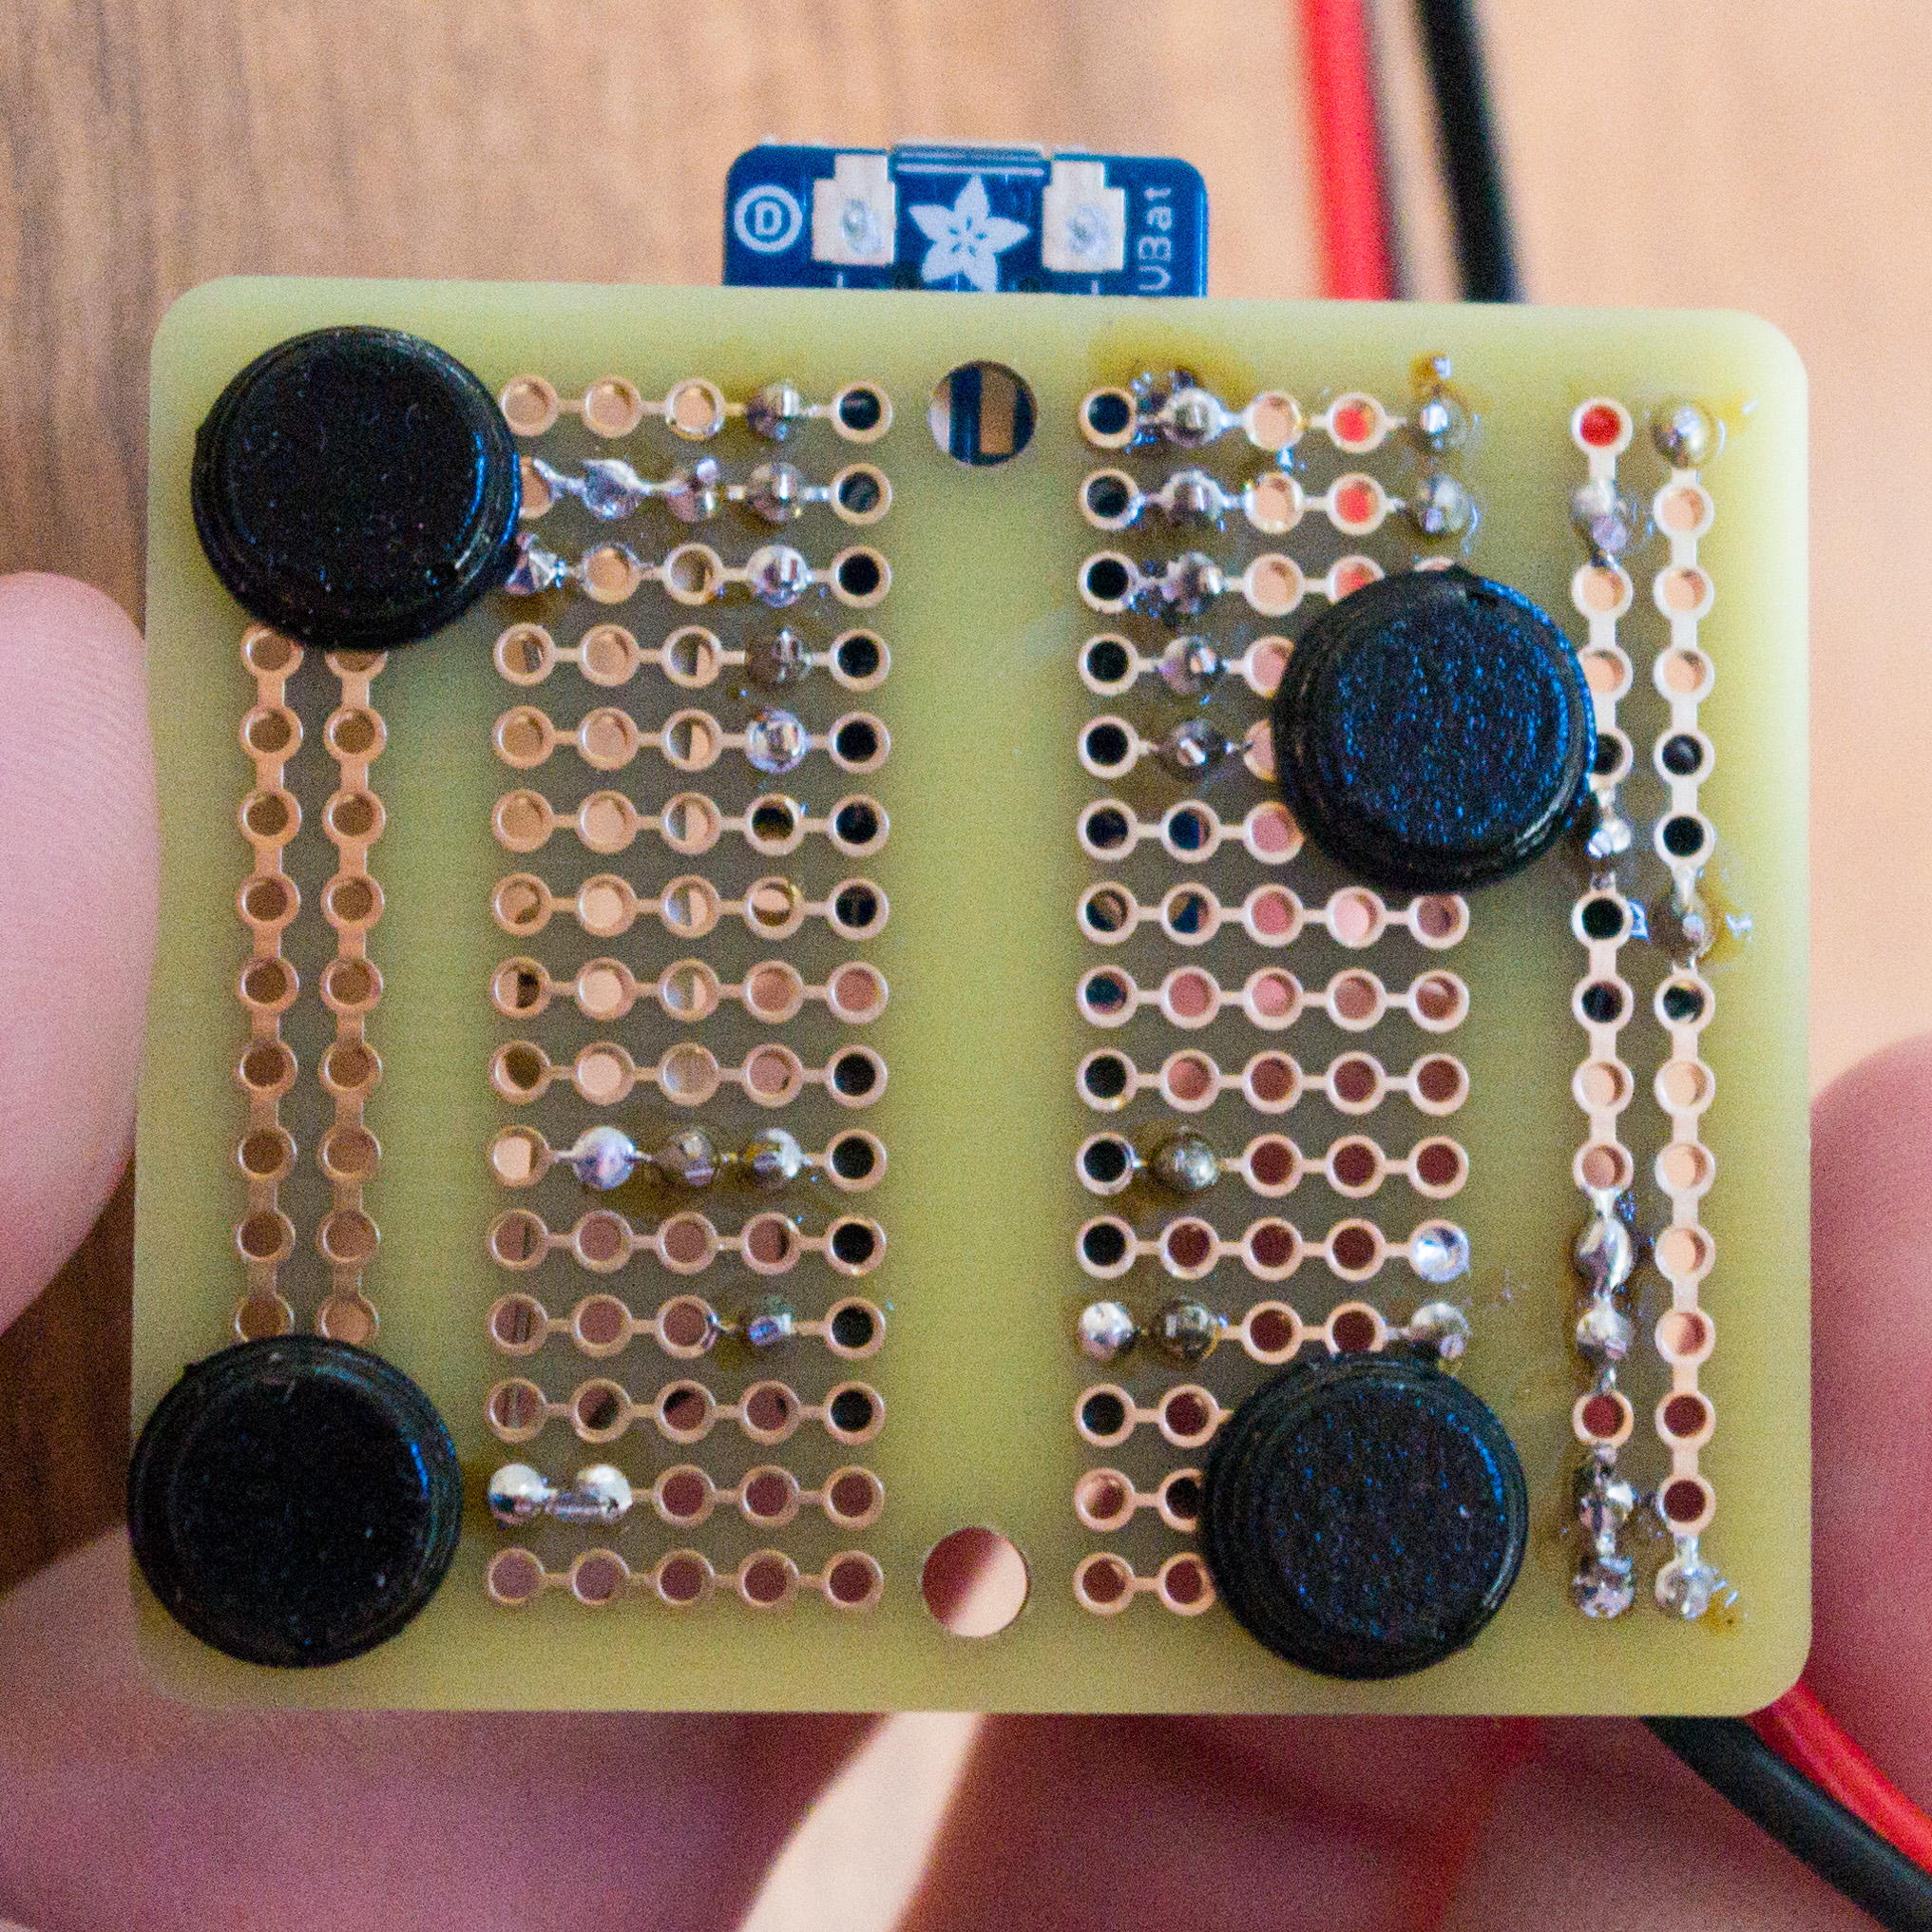 Adhesive feet on the bottom of the Perma-Proto board